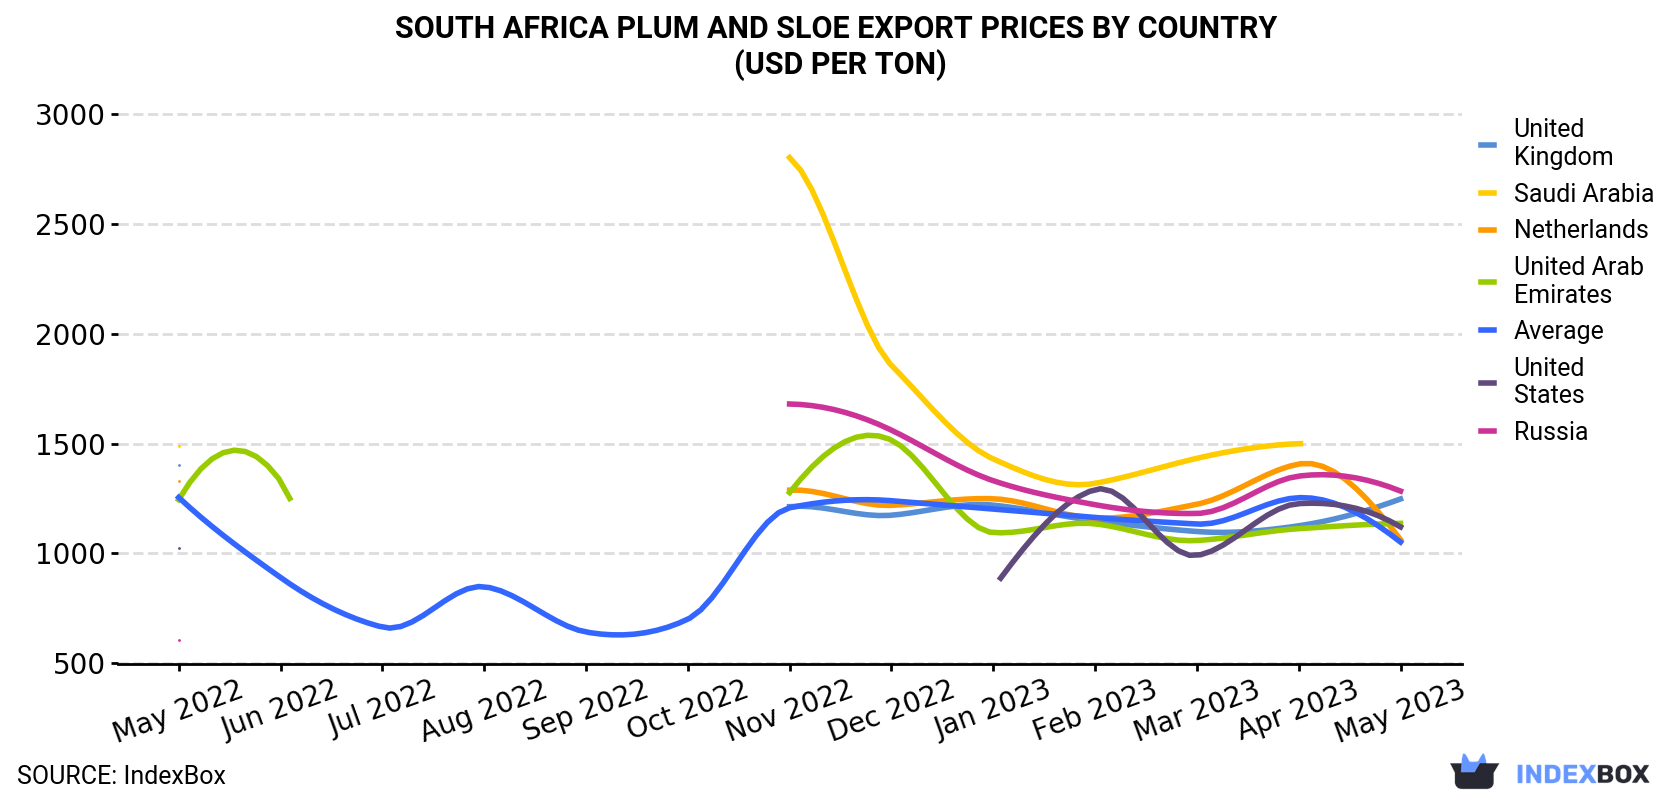 South Africa Plum And Sloe Export Prices By Country (USD Per Ton)